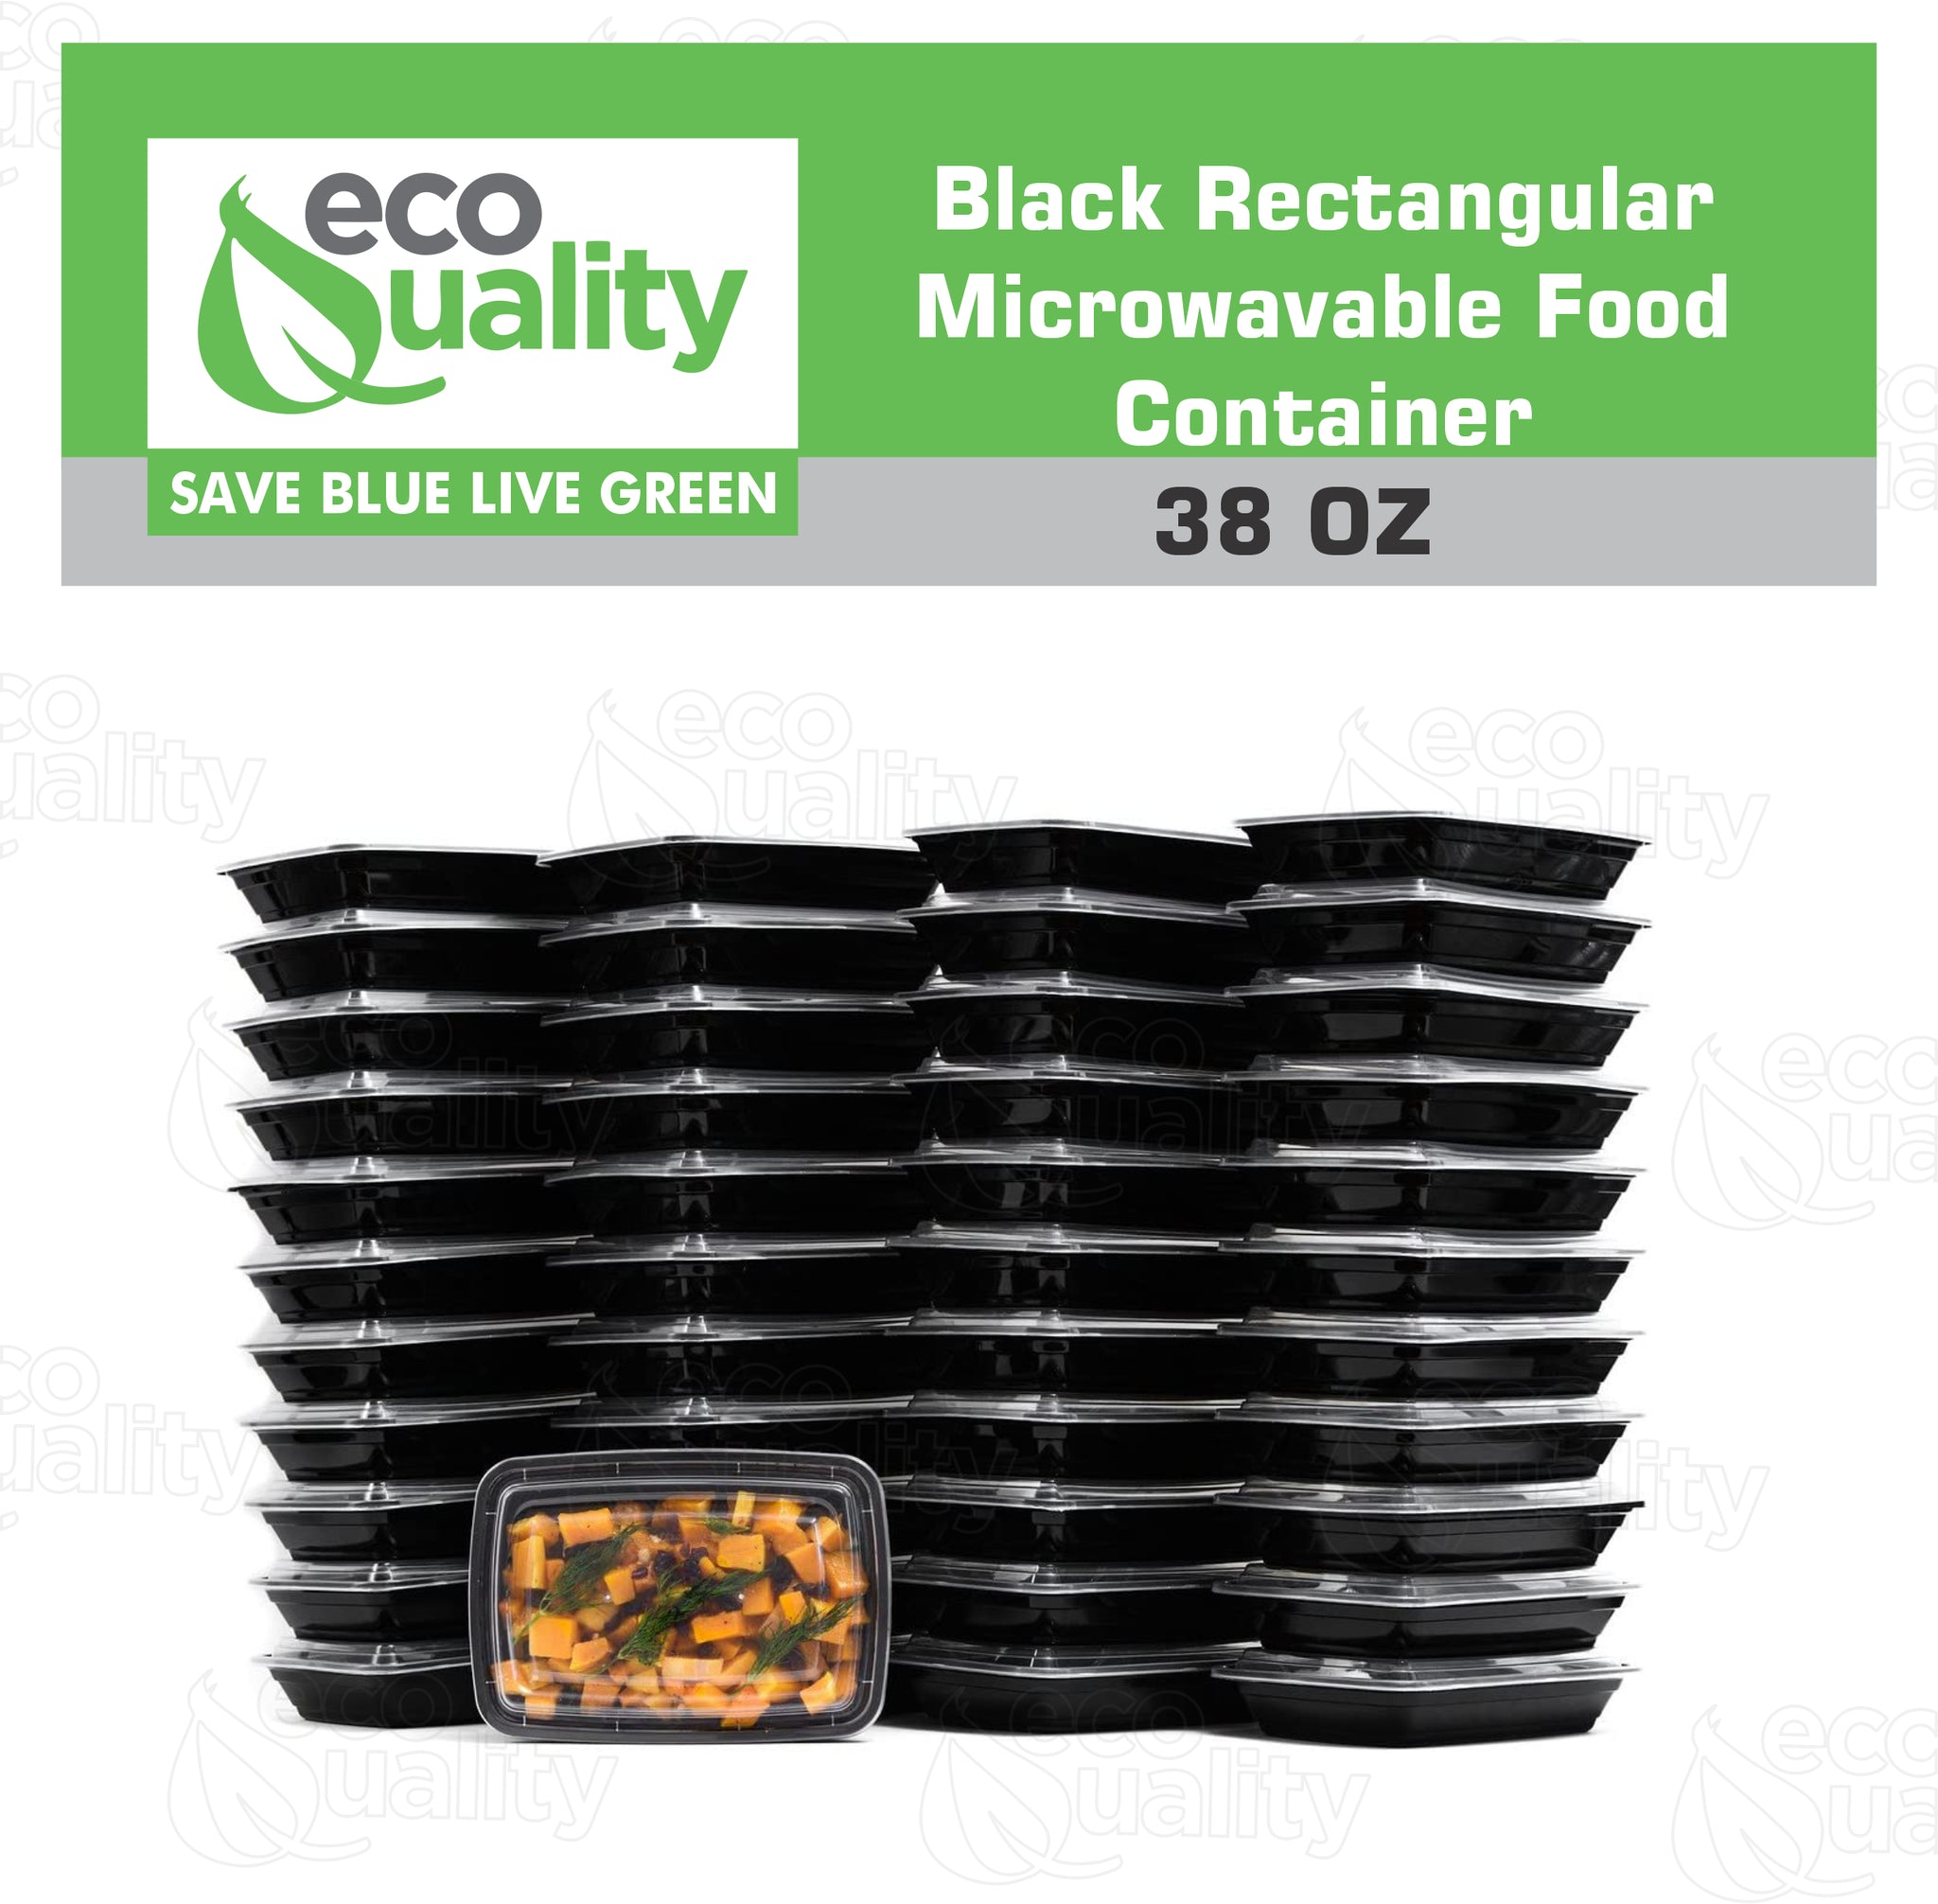 to-go boxes takeout delivery take out food storage containers Reusable Box Plastic Microwave Freezer black safe meal prep Lunch food storage solutions packaging Ecofriendly Disposable with lid black 38 oz 38 ounces economical bulk wholesale ecoquality restaurant fast food supplies nyc